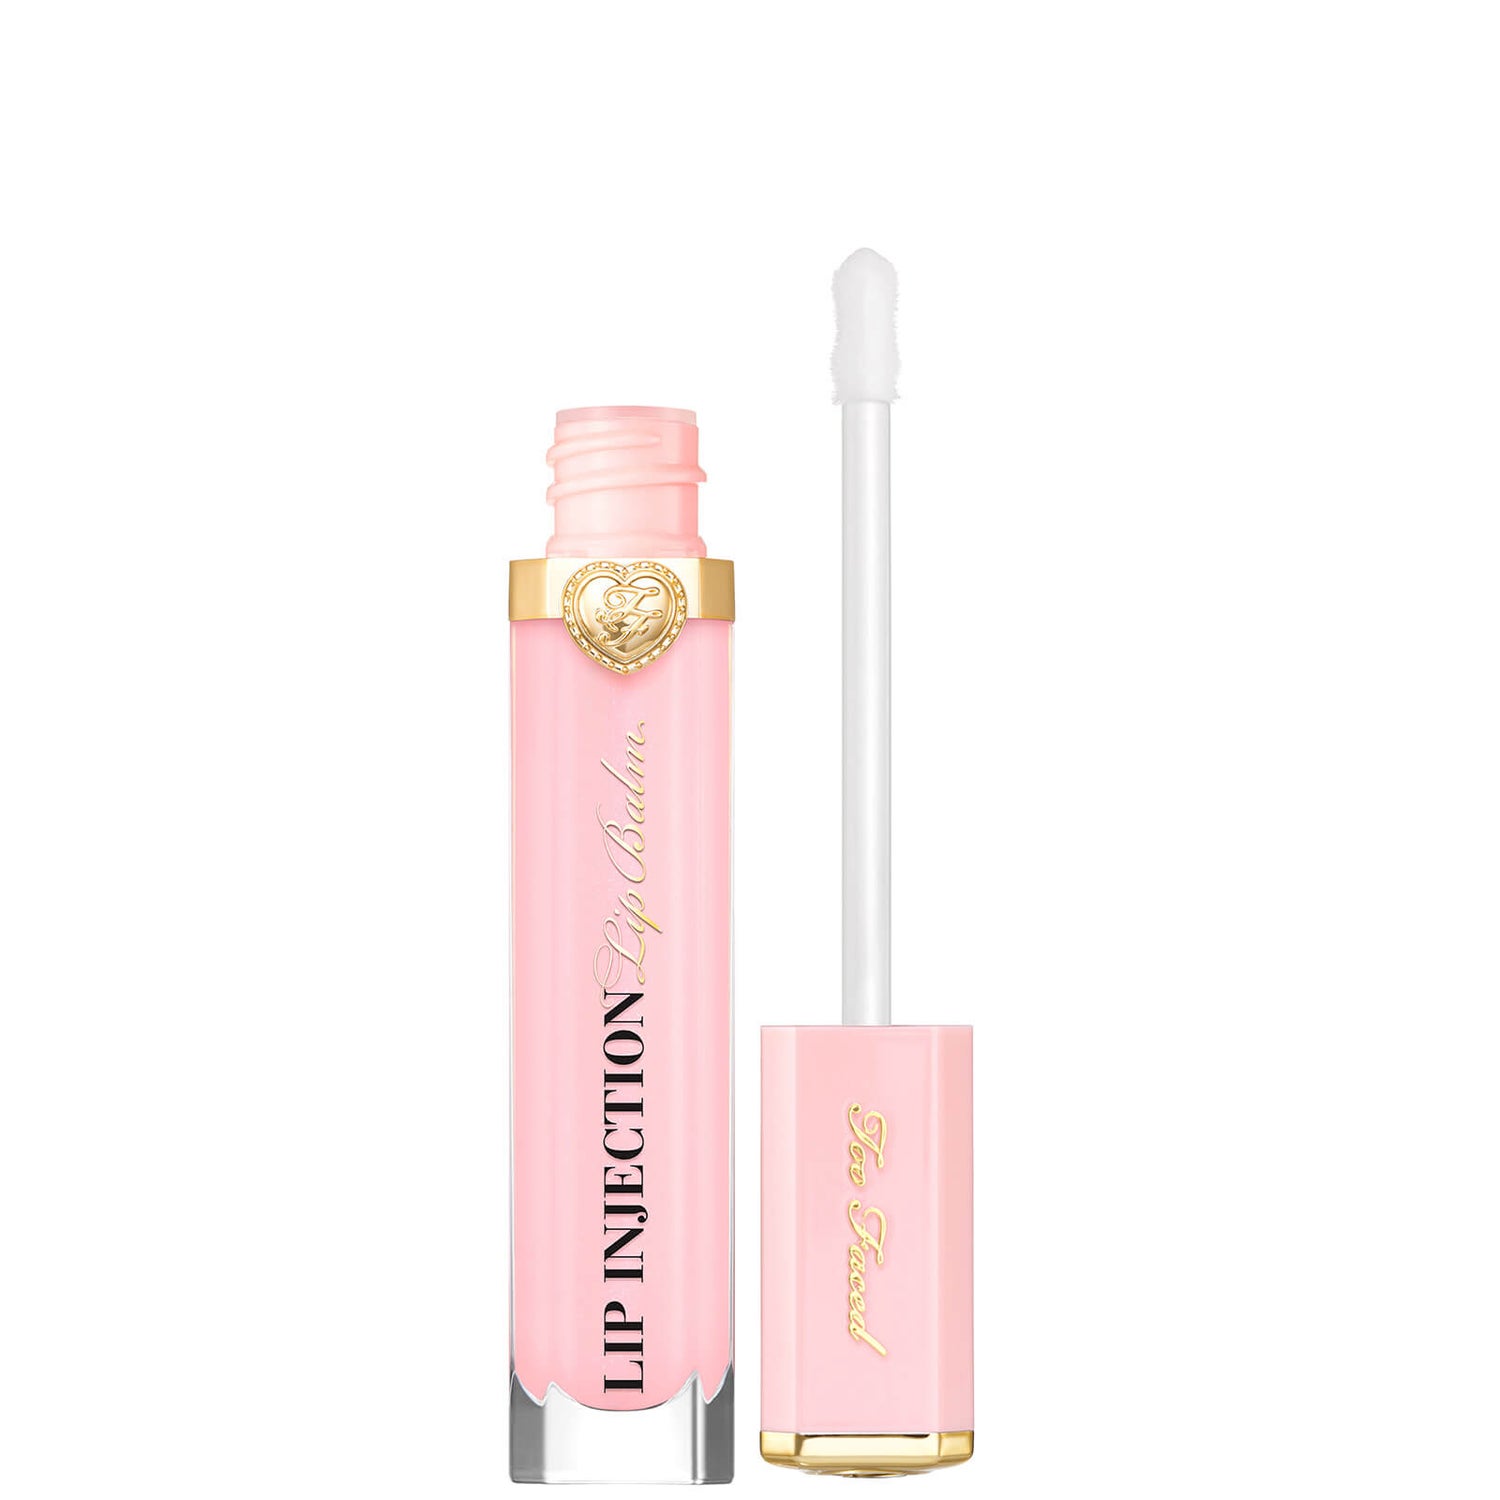 Too Faced Lip Injection Power Plumping Luksus Balm 7ml